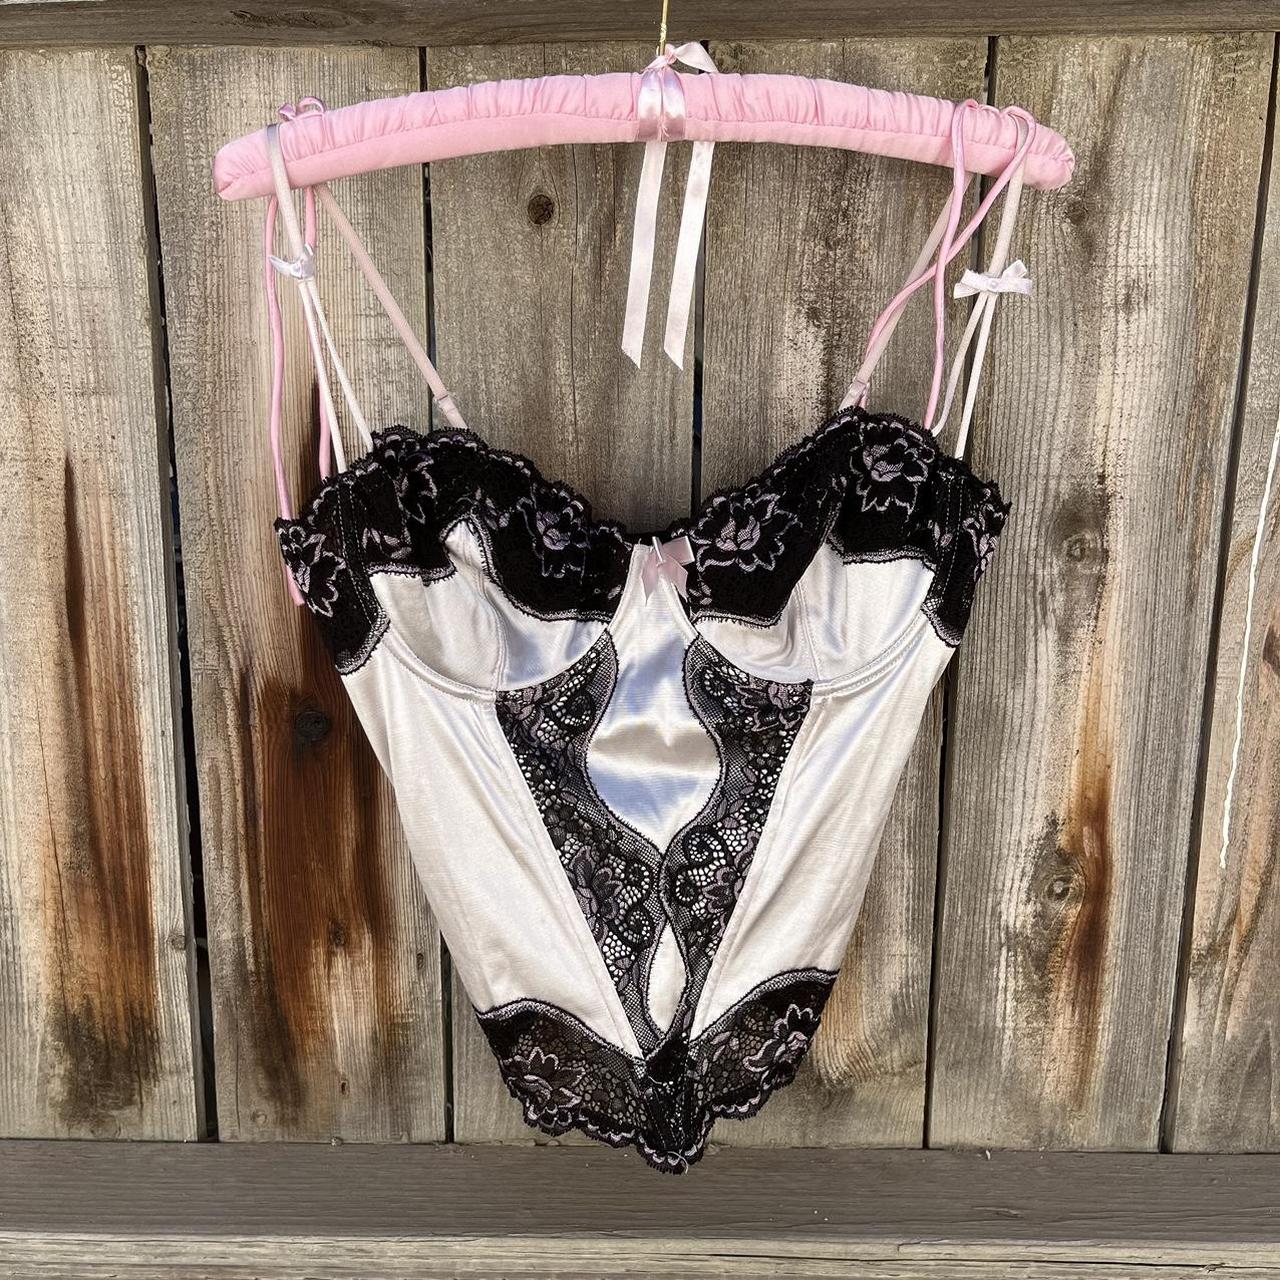 double strapped, colorful pastel bra with floral - Depop